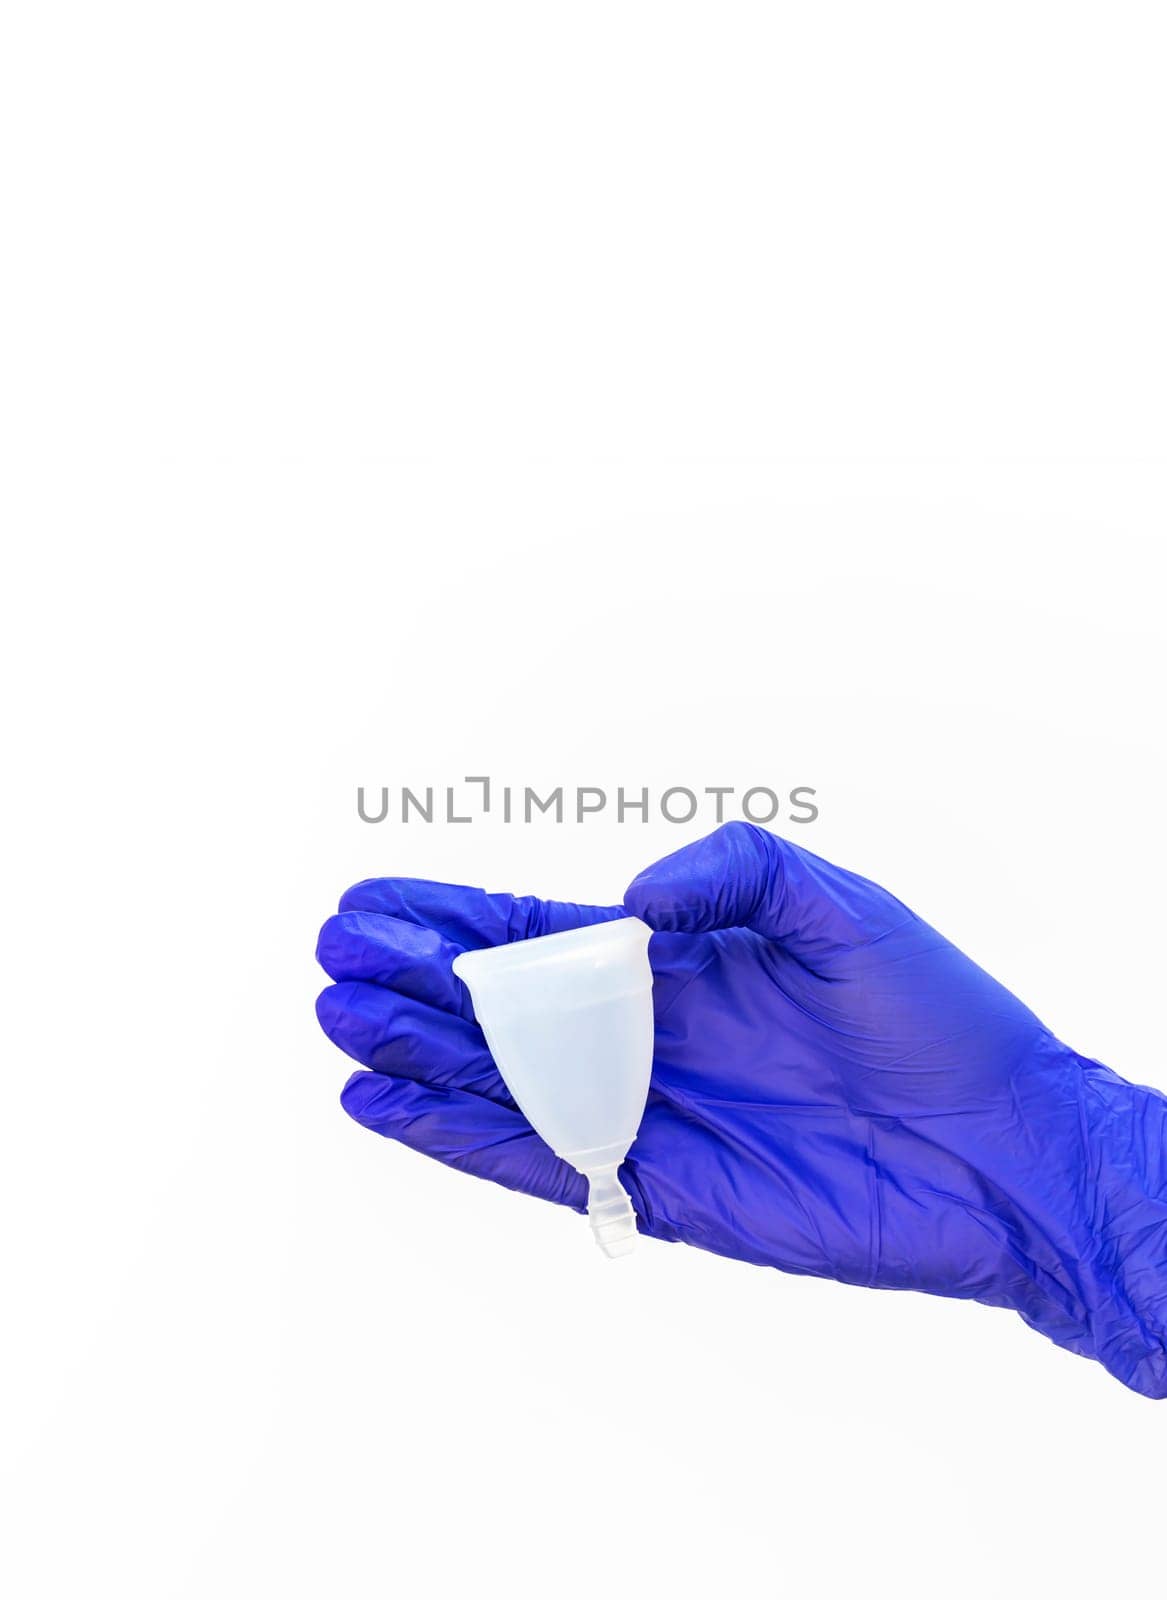 Design World Menstrual Hygiene Day On May, 28. Isolated Human Hand in Glove Holds Menstrual Cup on White Background. Backdrop Copy Space, Vertical Plane, Design. High quality photo